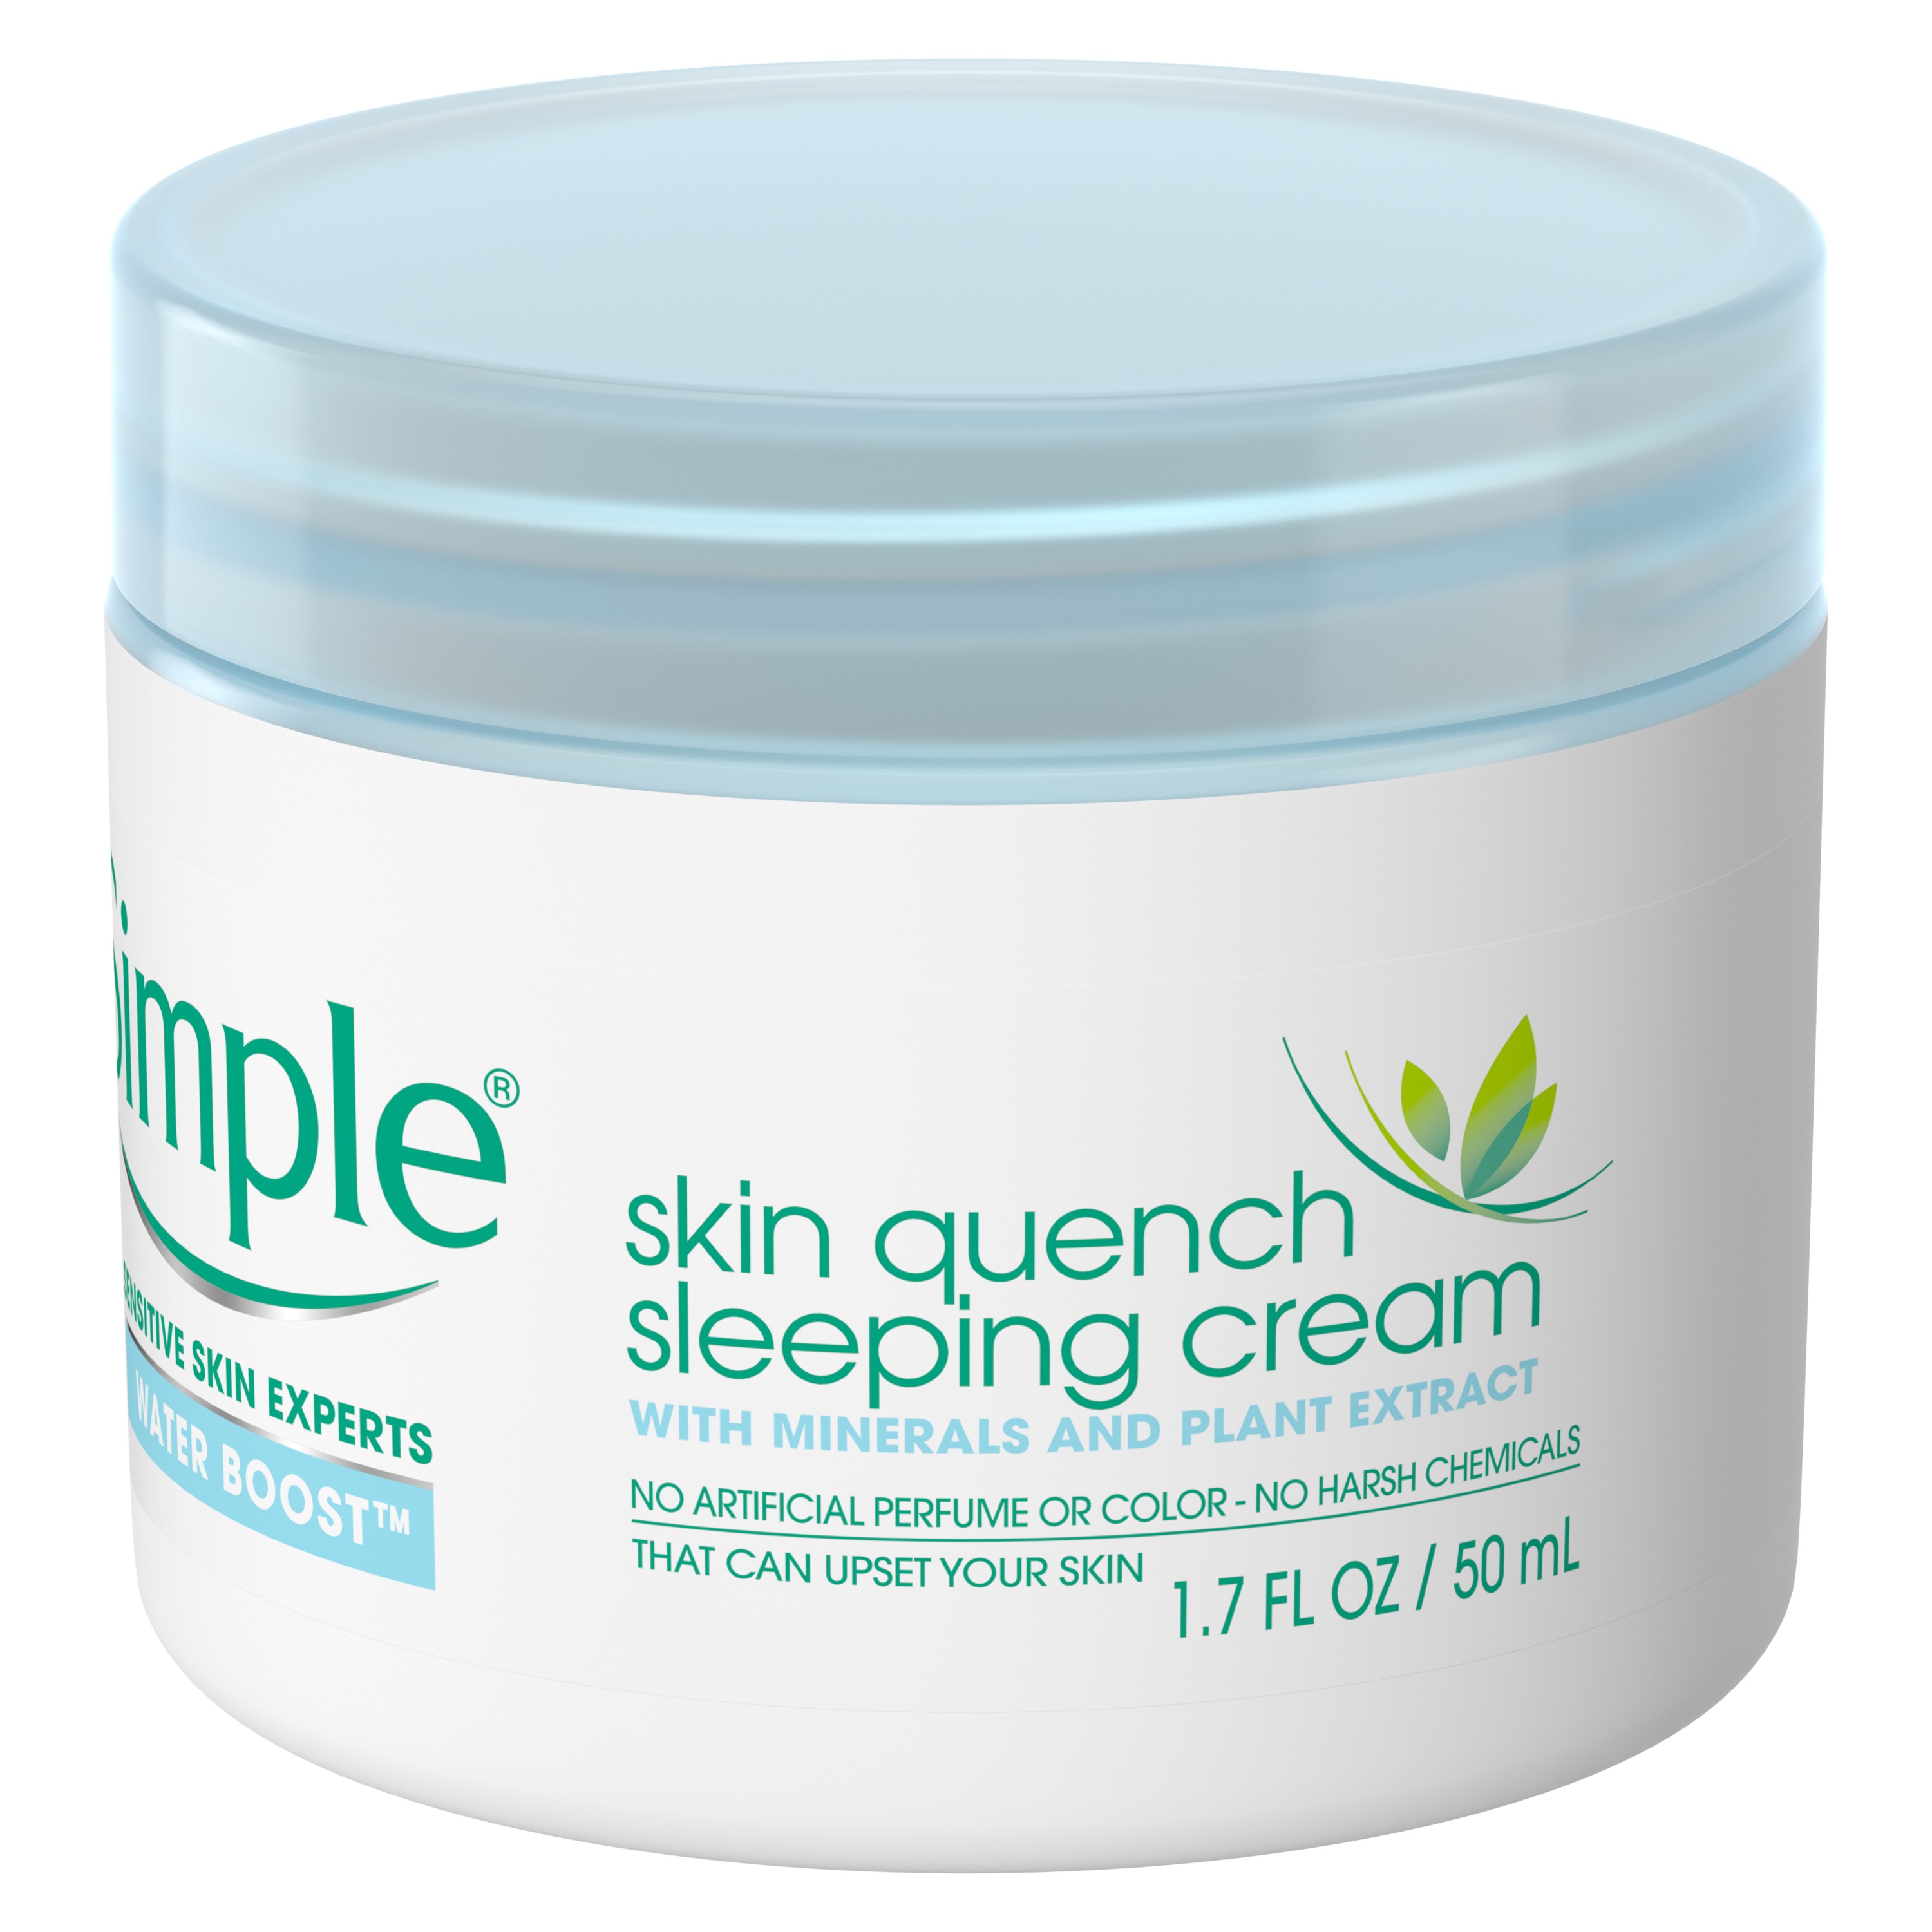 Simple Water Boost Skin Quench Sleeping Cream 1.7 oz - image 5 of 13